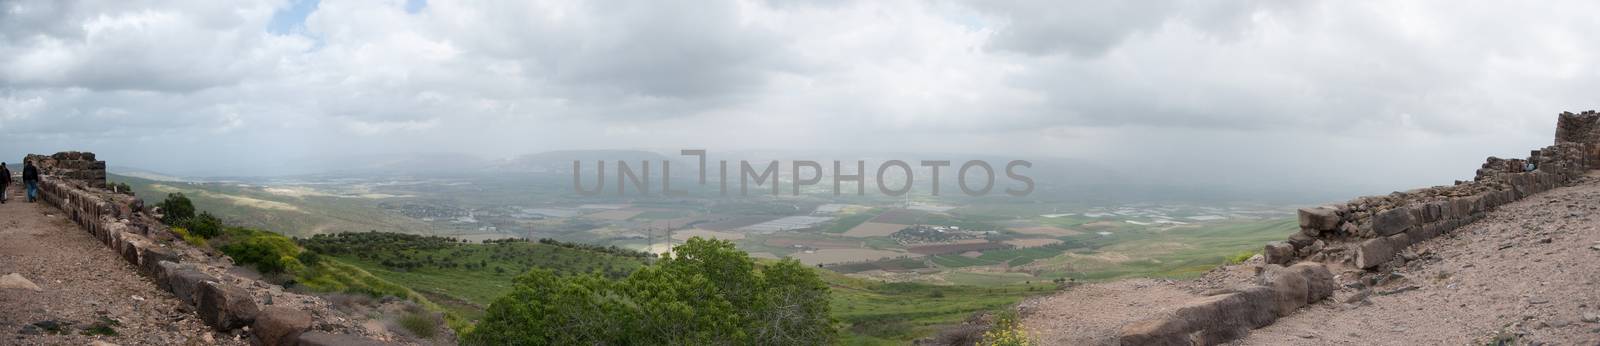 Israeli landscape wide panorama of nature and sky